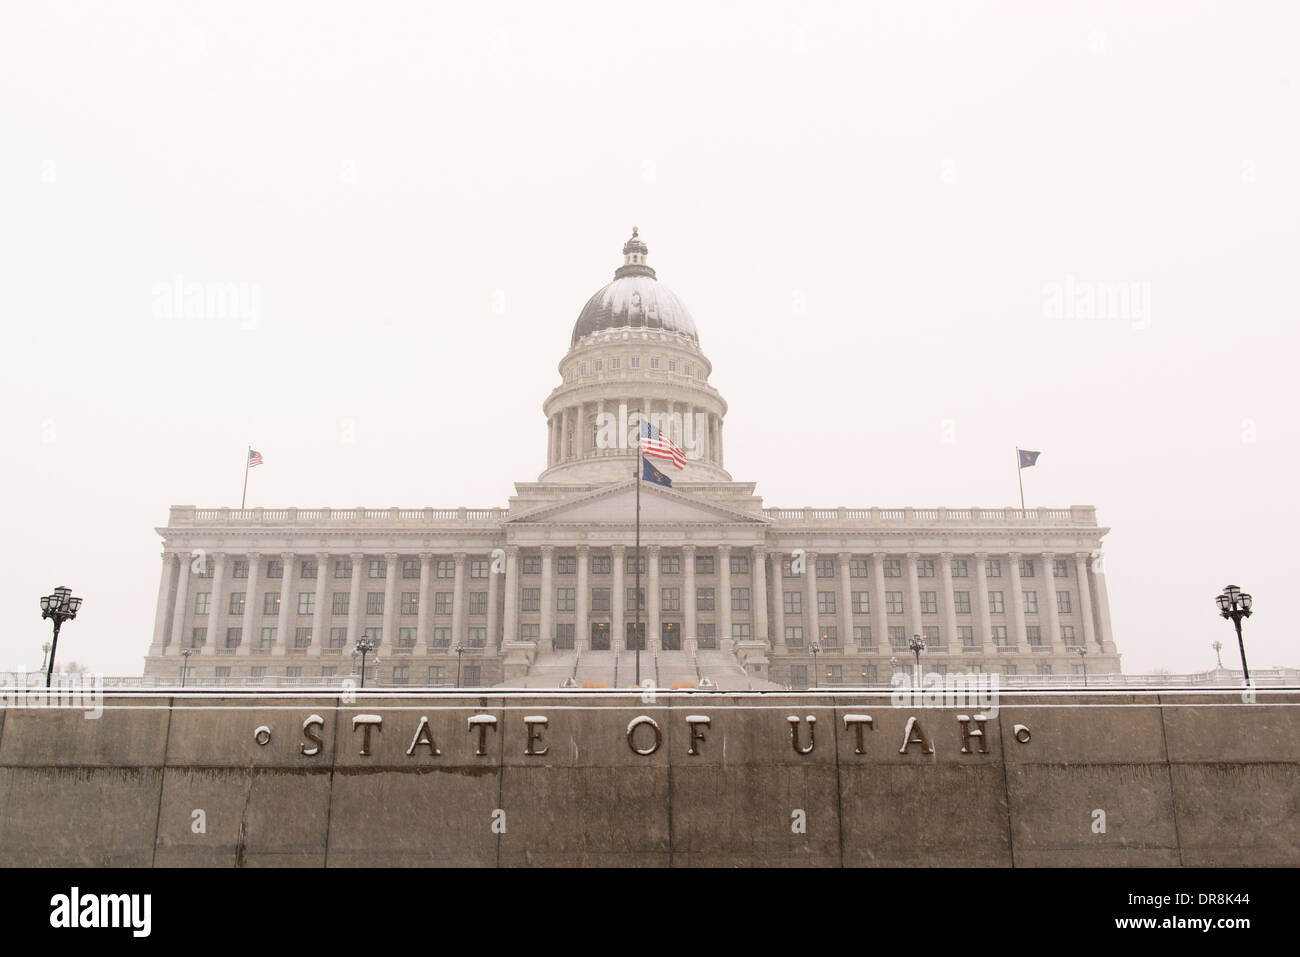 Utah's State Capitol building after snow. Stock Photo